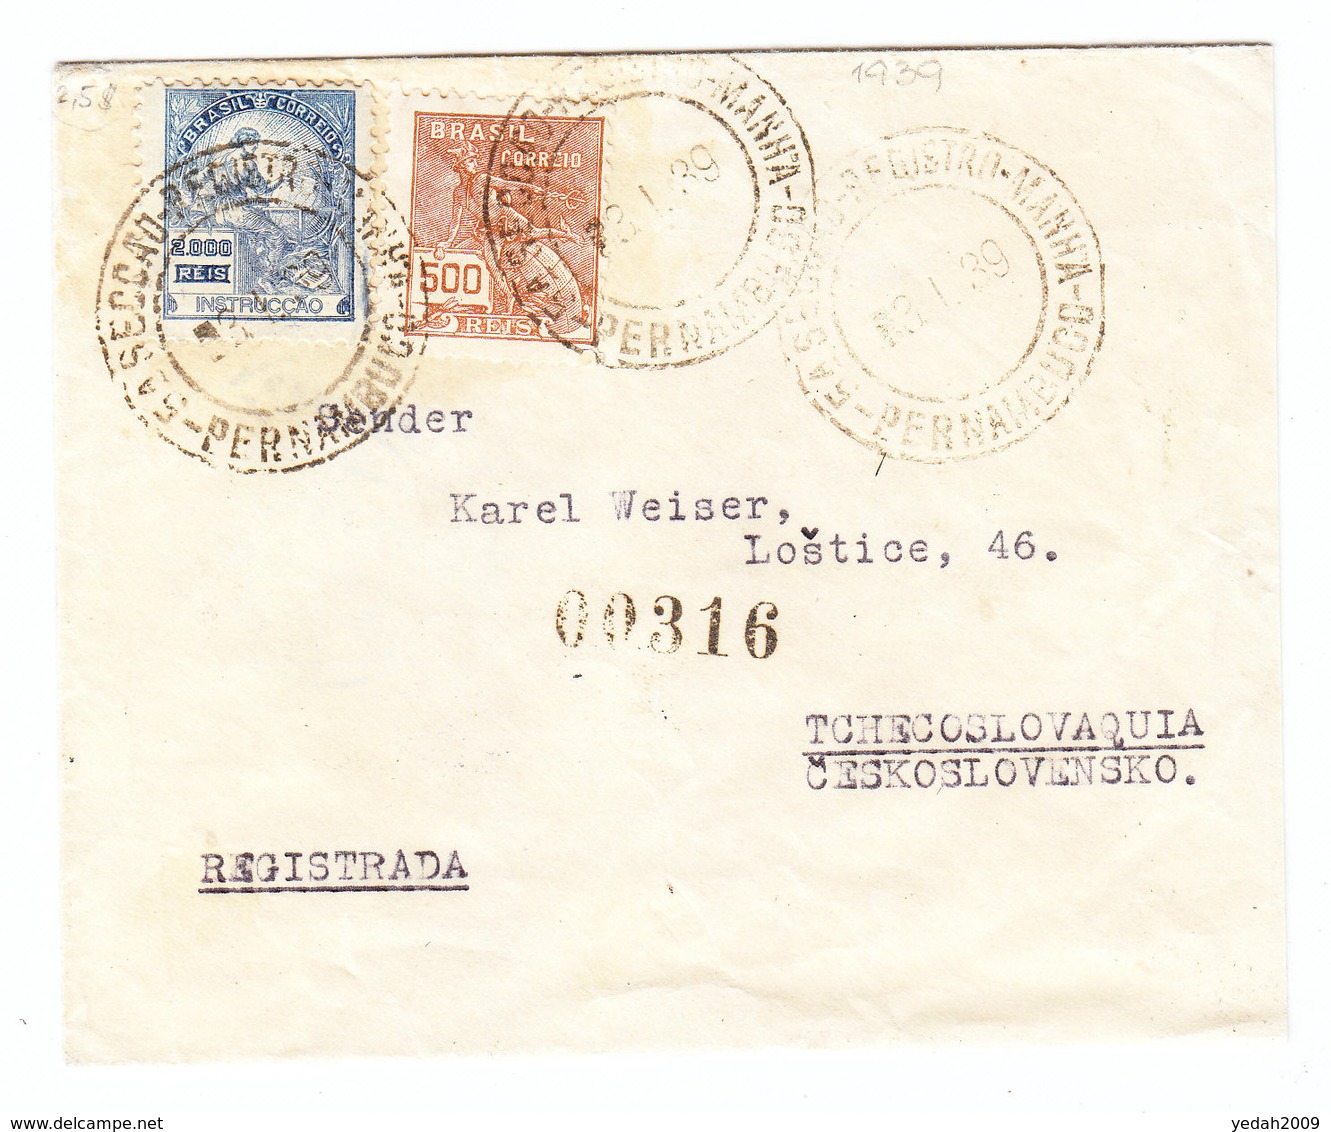 Brazil COVER Pernambuco Lostice Czechoslovakia REGISTERED 1939 - Covers & Documents